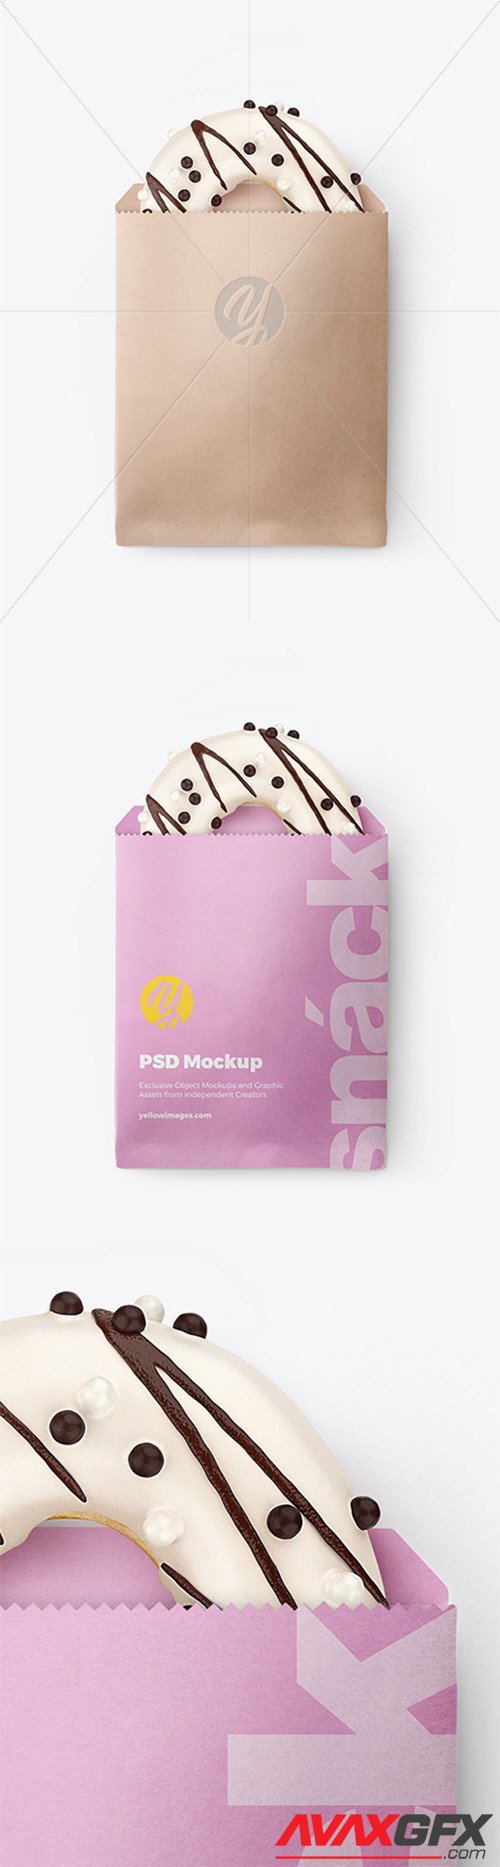 Download 10 Glossy Paper Shopping Bag Halfside View Object Mockups Yellowimages Mockups